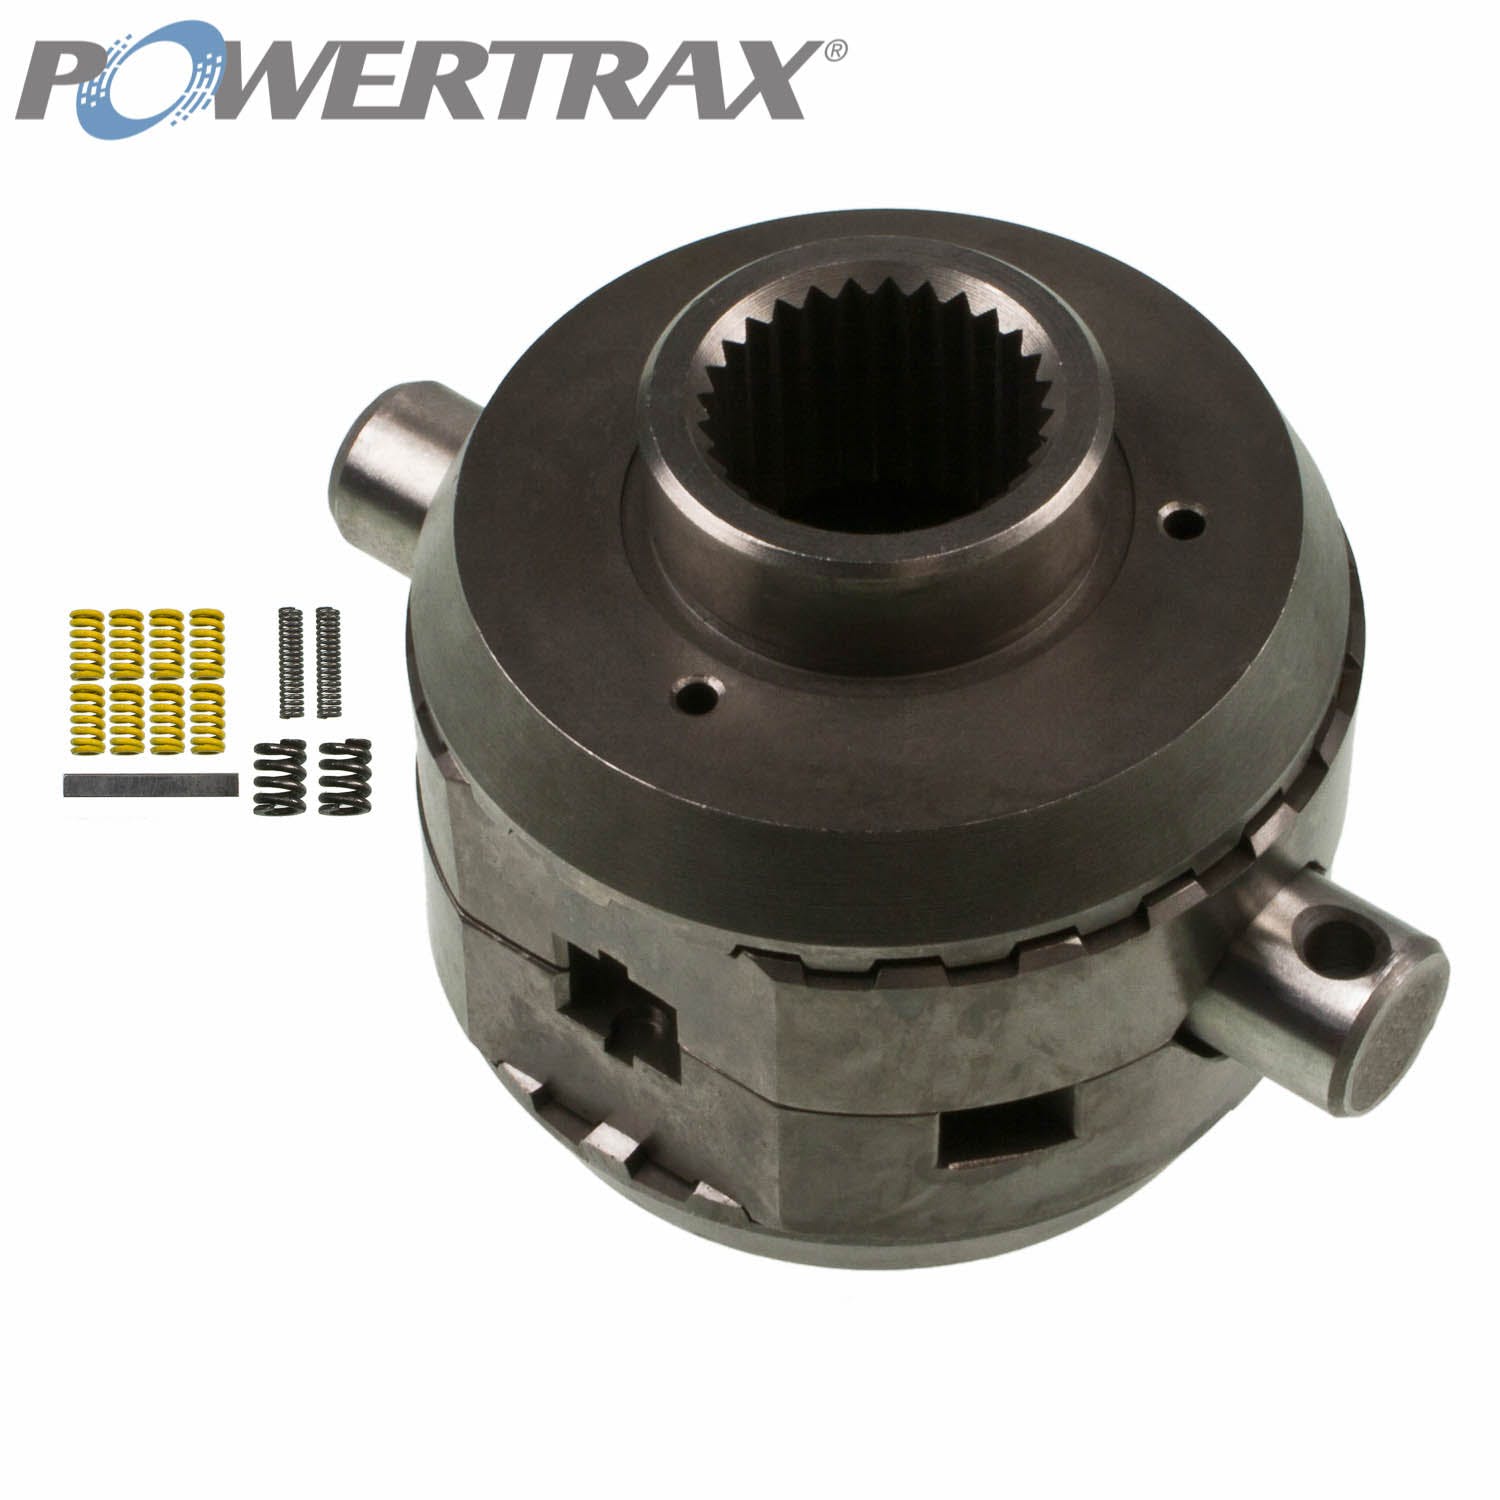 PowerTrax 9207822805 No-Slip Traction System